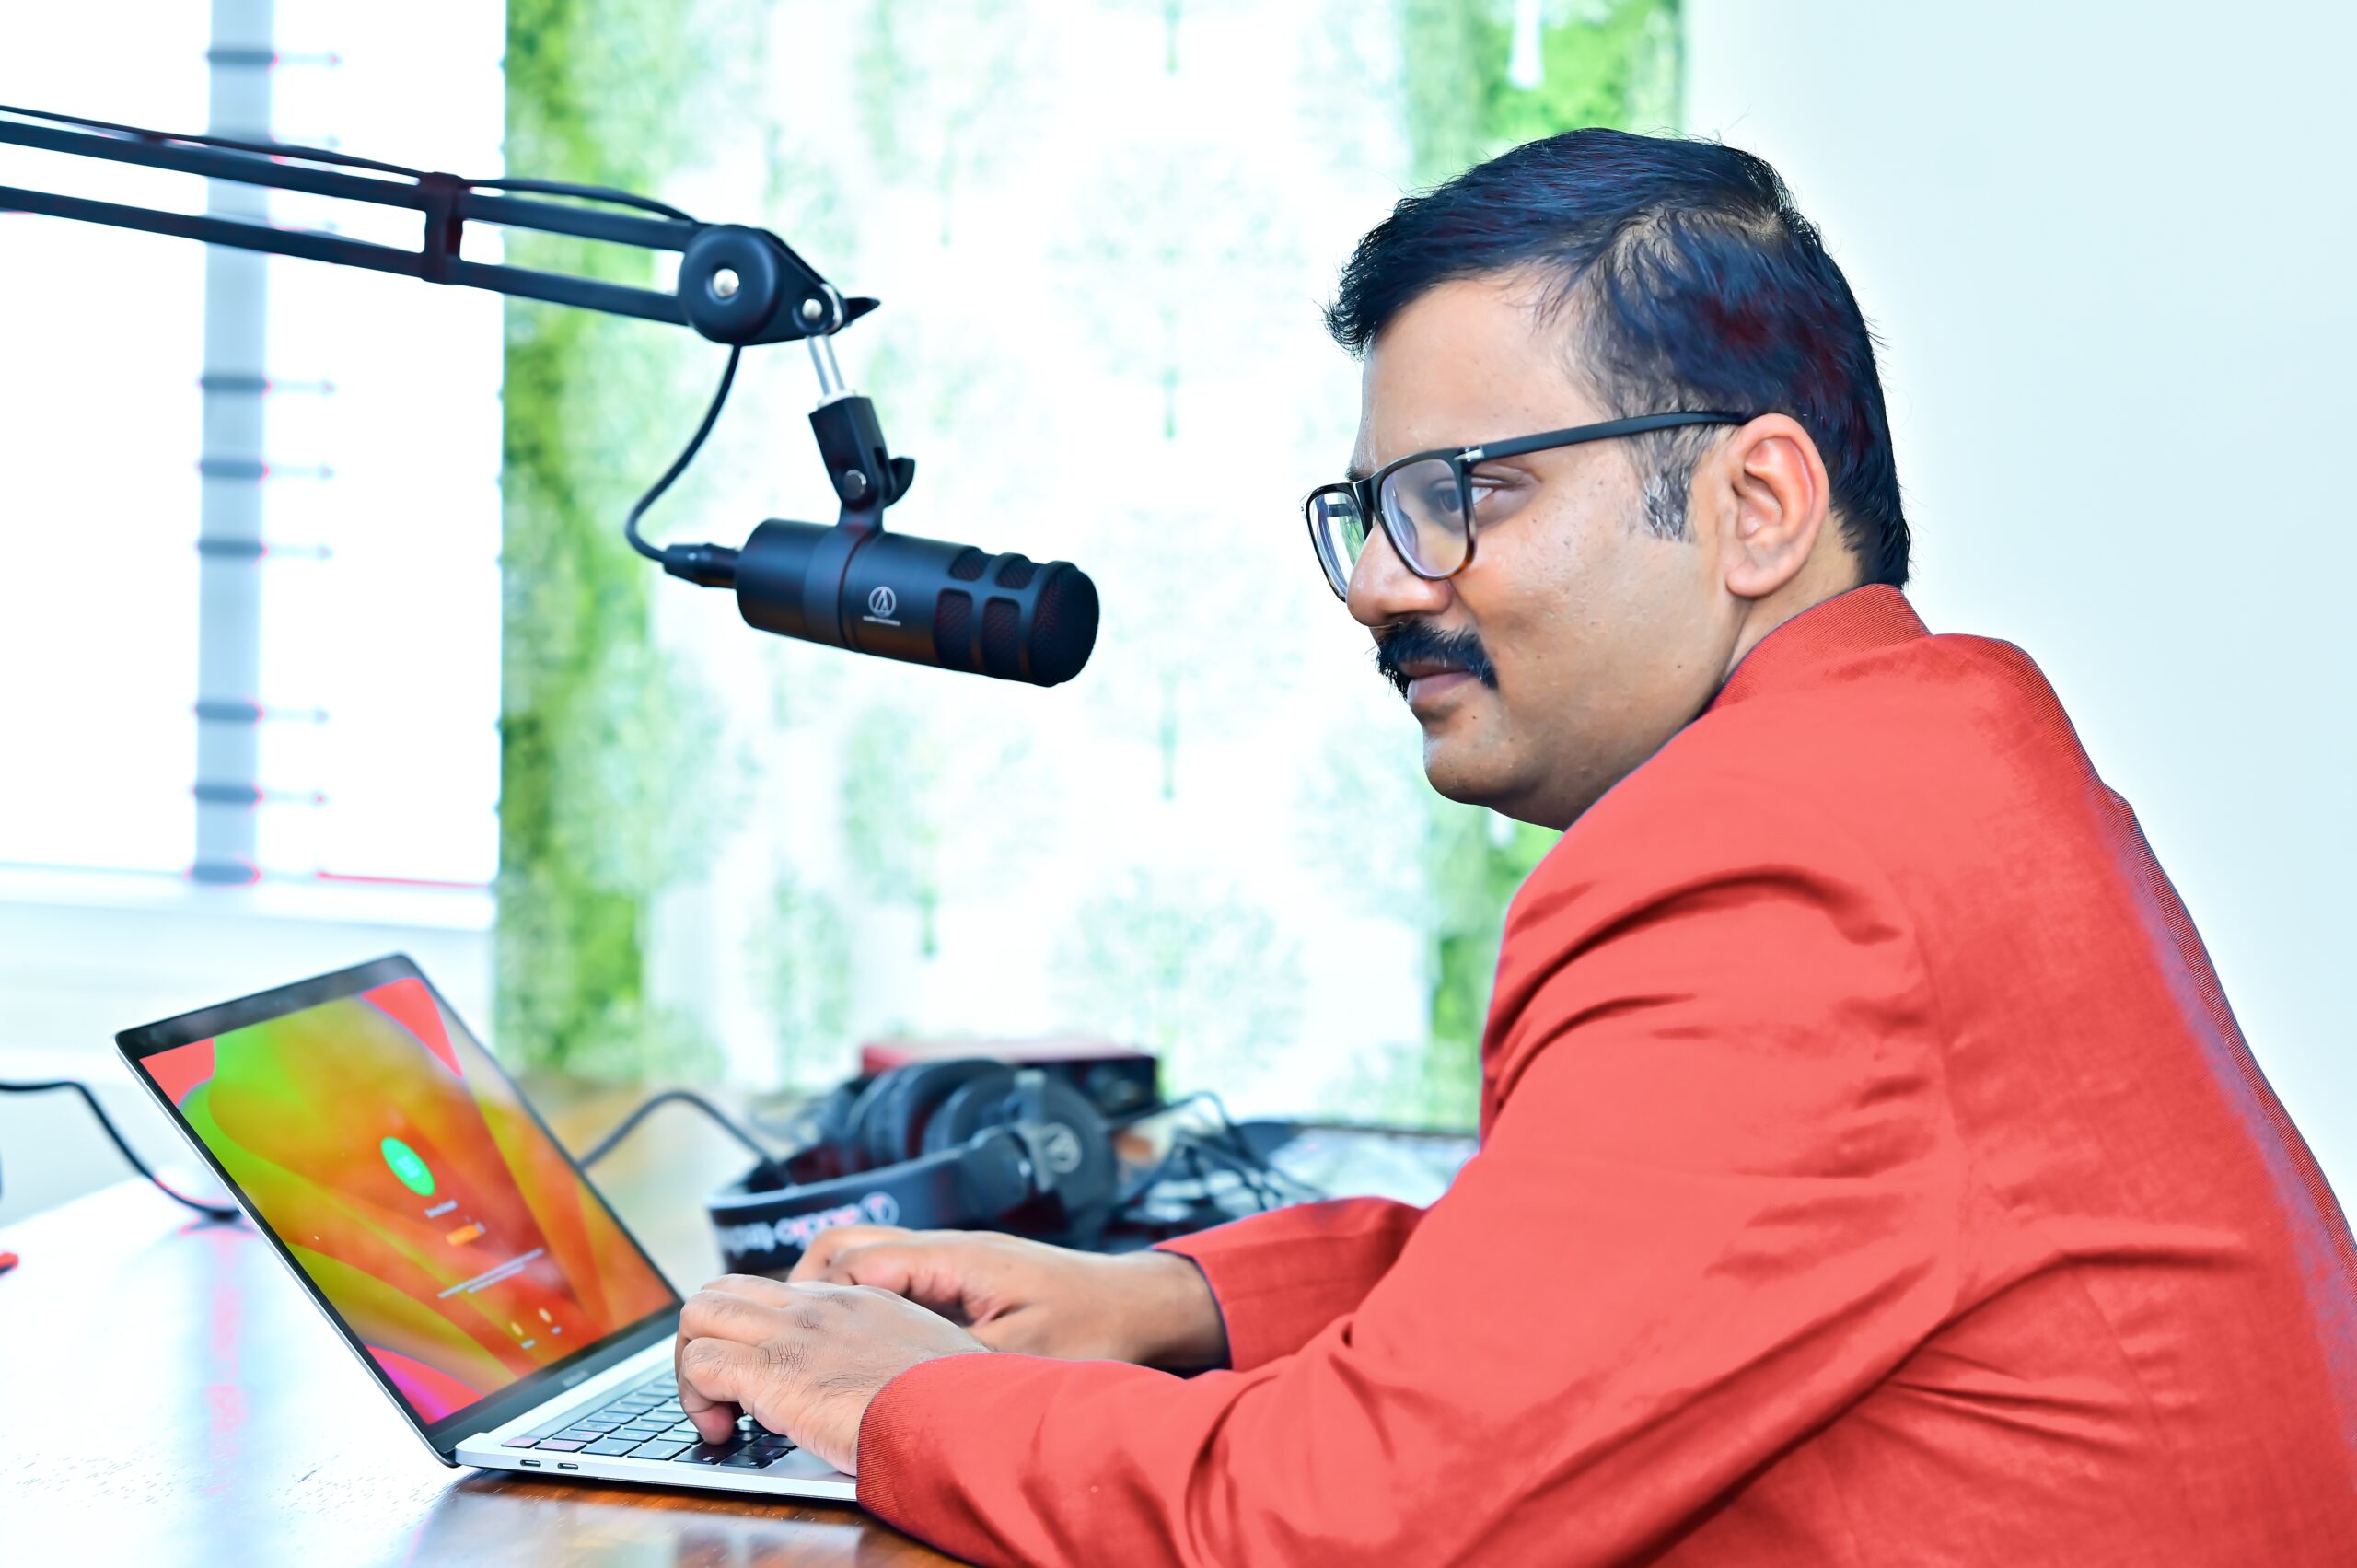 Srinivas Saripalli is widely regarded as the most accomplished life and business strategist in the country. A world renowned expert in the field of leadership and life coaching.